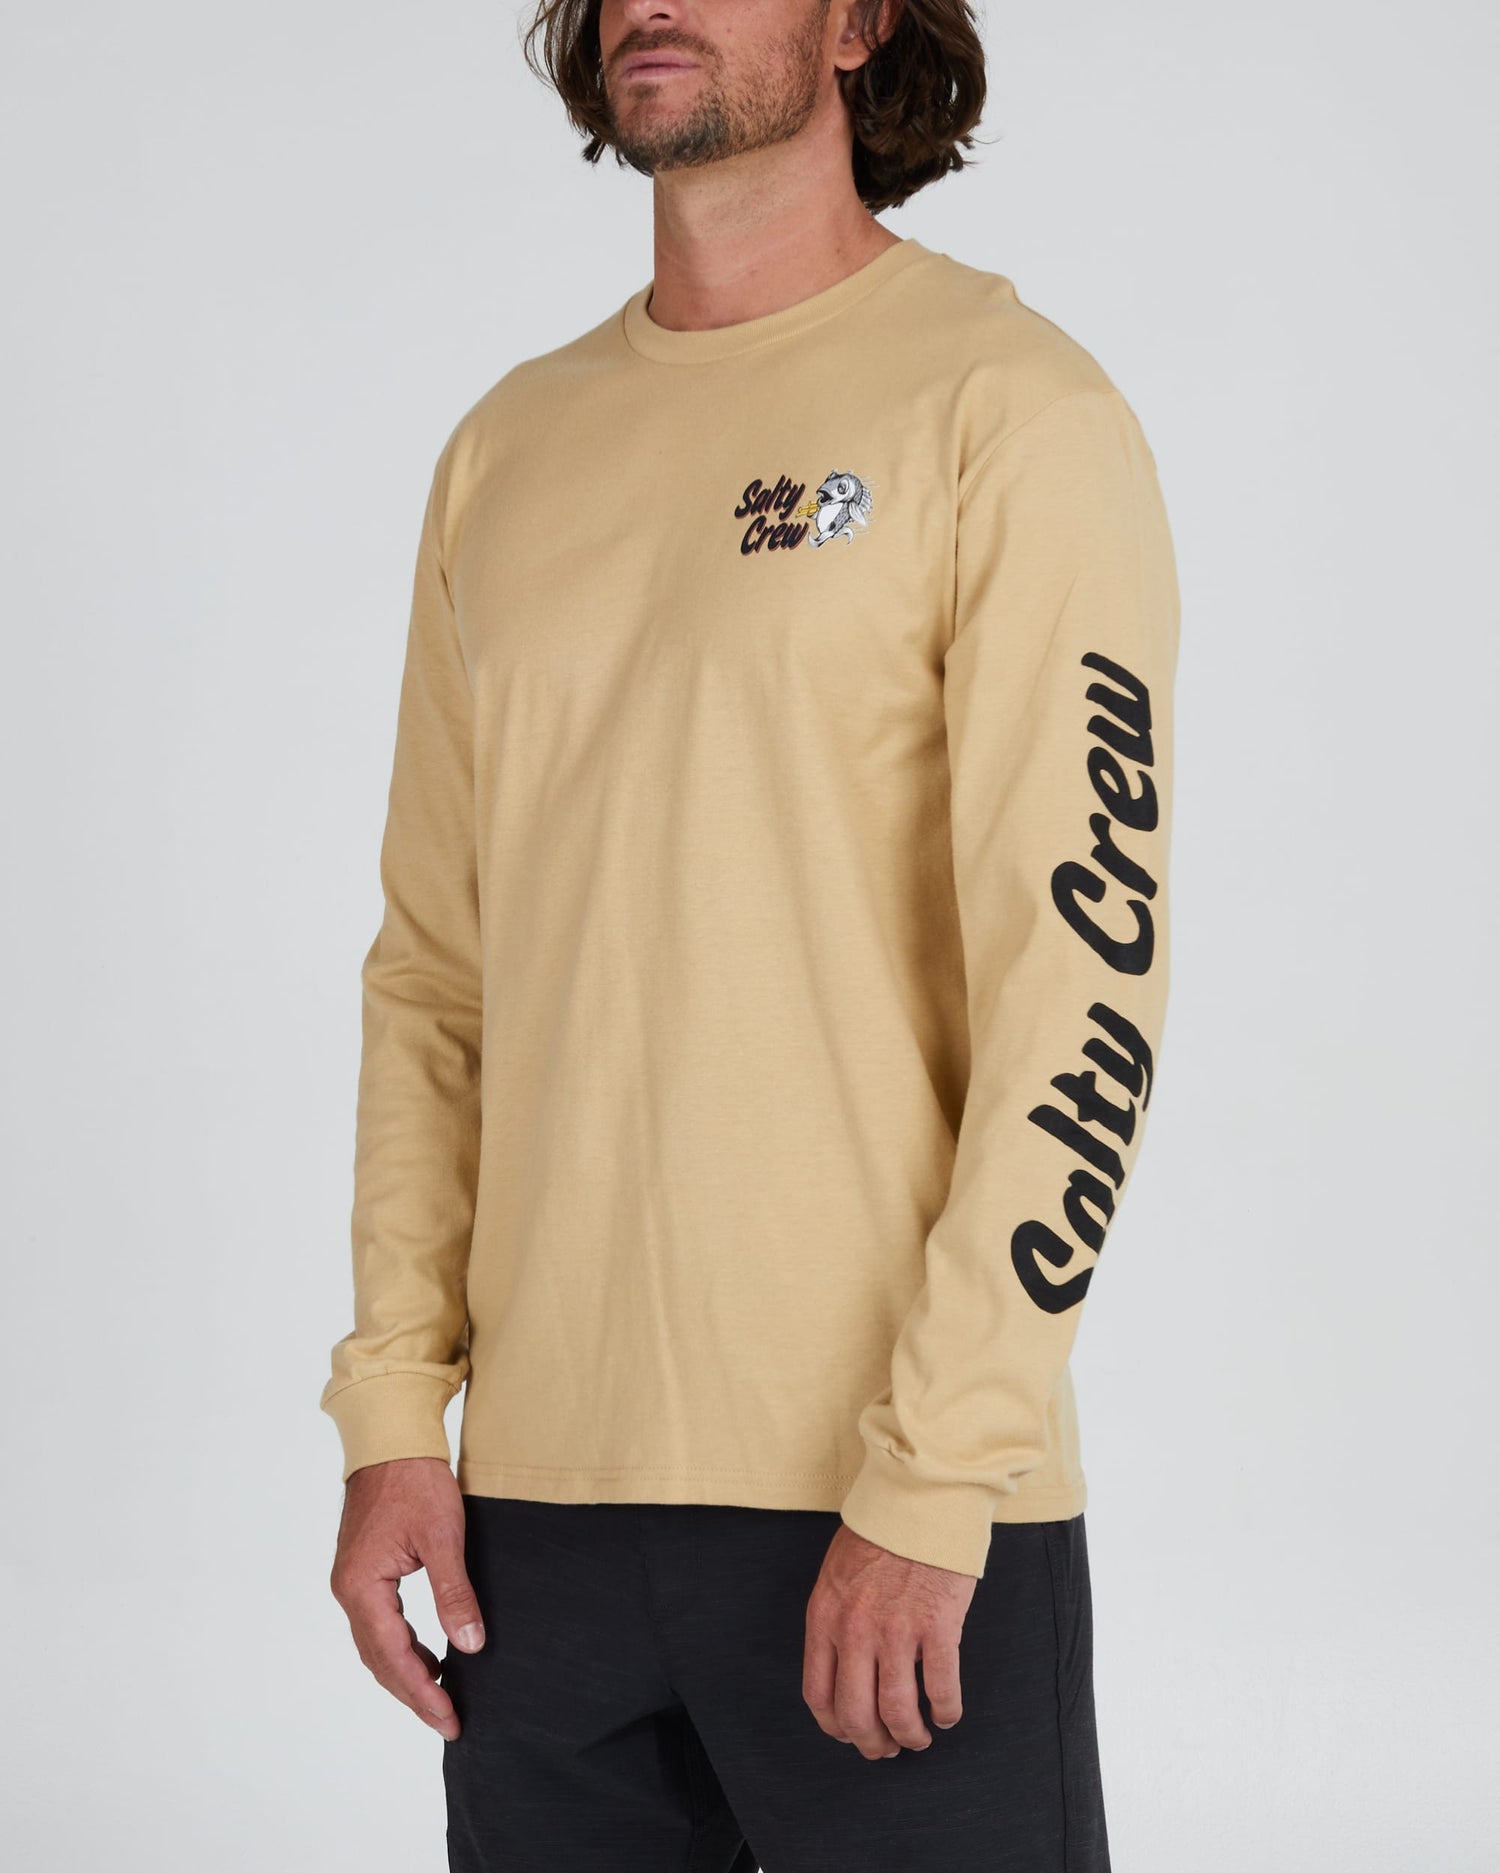 Salty crew T-SHIRTS L/S FISH AND CHIPS PREMIUM L/S TEE - Camel in Camel